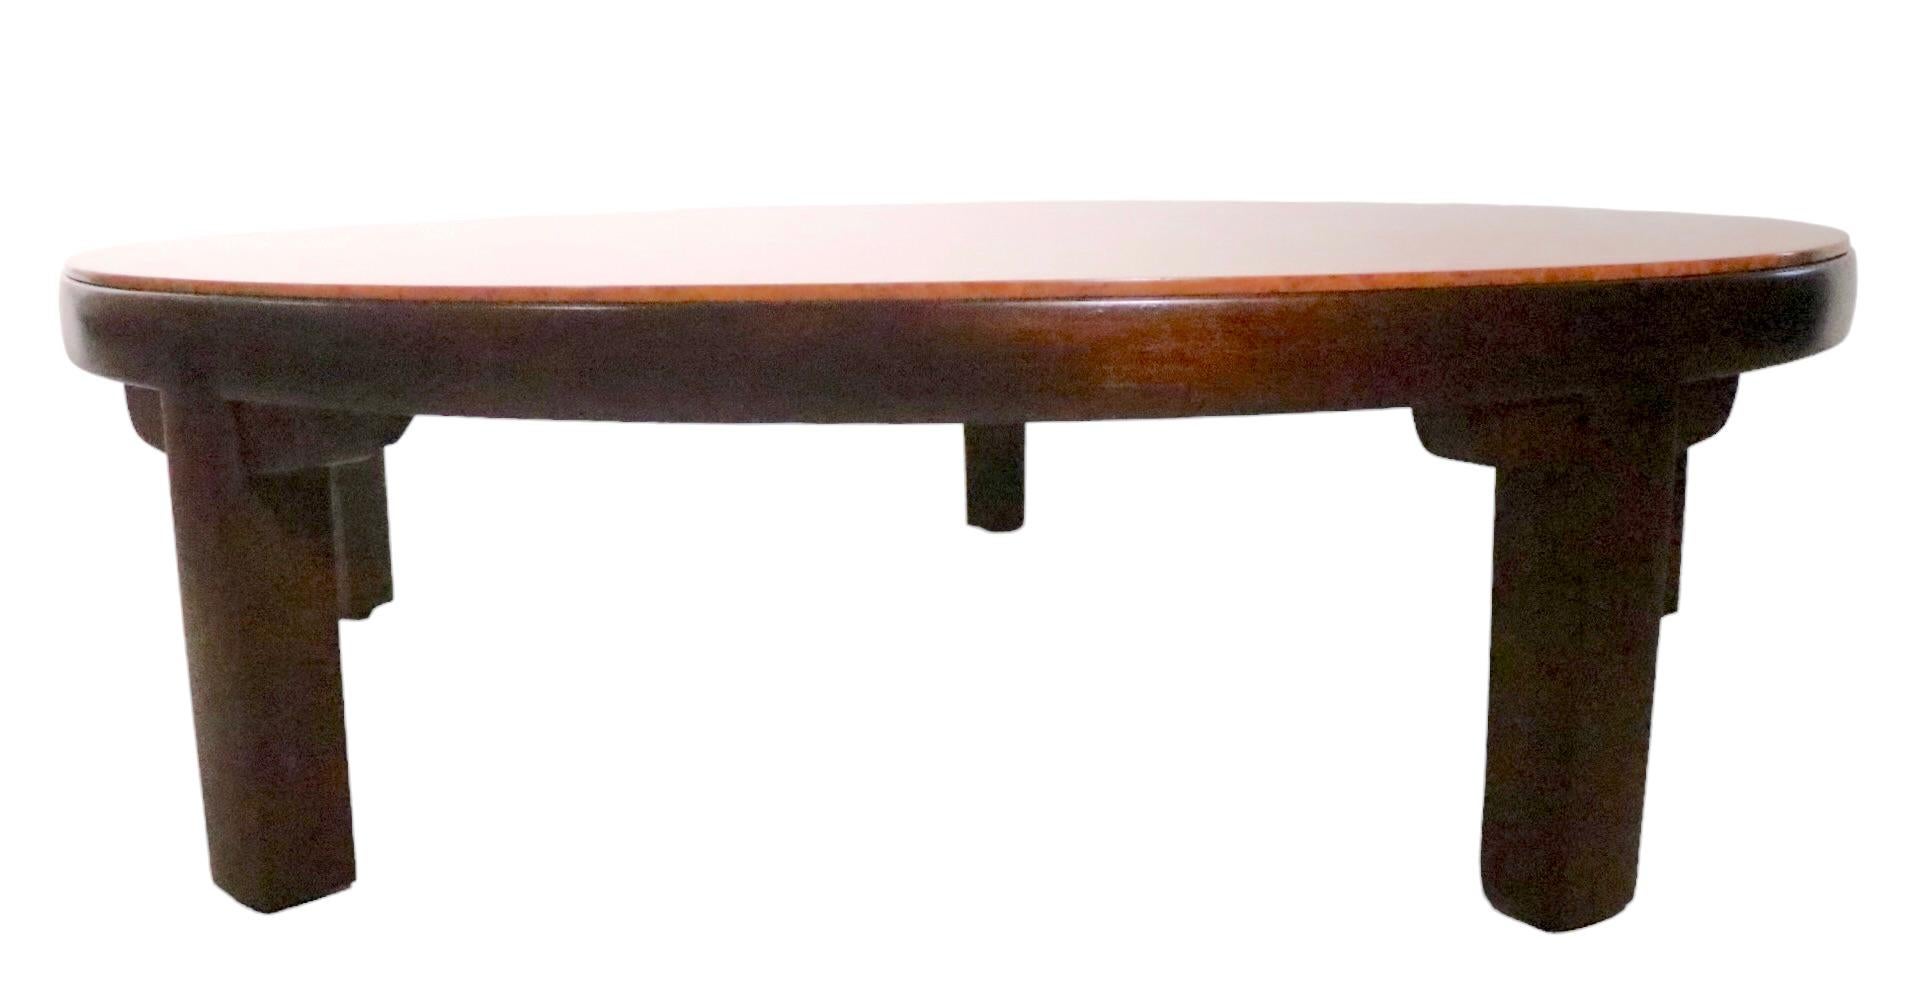 Burl and Walnut Coffee Table by Edward Wormley for Dunbar For Sale 1